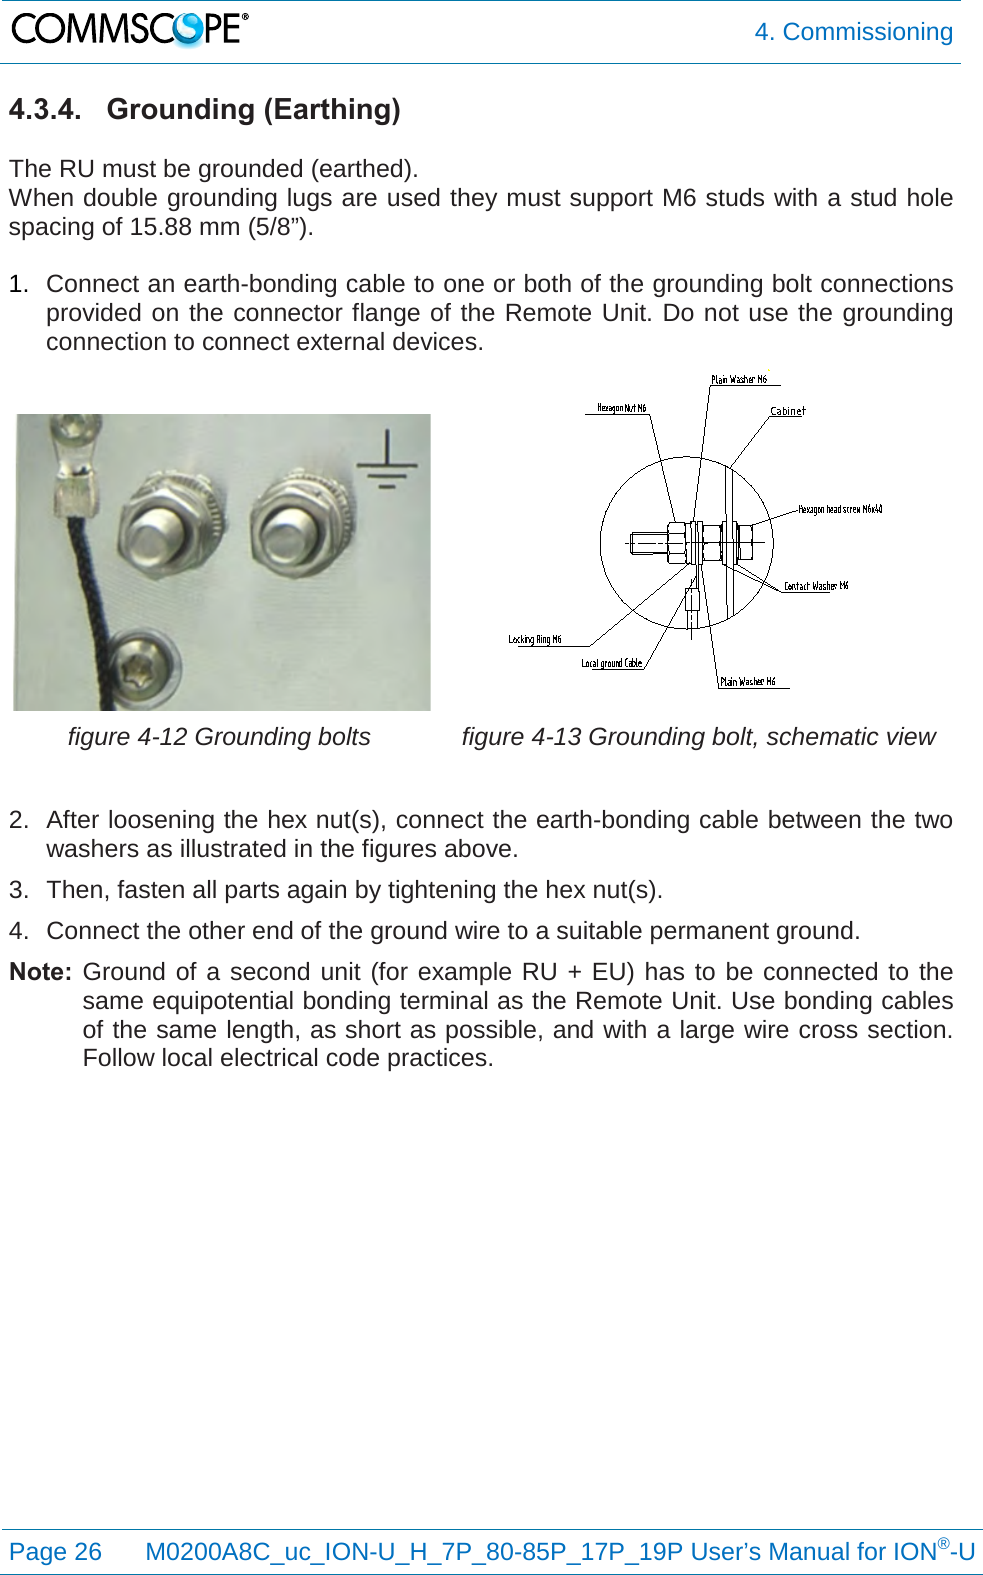  4. Commissioning  Page 26 M0200A8C_uc_ION-U_H_7P_80-85P_17P_19P User’s Manual for ION®-U  4.3.4. Grounding (Earthing)  The RU must be grounded (earthed). When double grounding lugs are used they must support M6 studs with a stud hole spacing of 15.88 mm (5/8”).  1. Connect an earth-bonding cable to one or both of the grounding bolt connections provided on the connector flange of the Remote Unit. Do not use the grounding connection to connect external devices.   figure 4-12 Grounding bolts  figure 4-13 Grounding bolt, schematic view  2. After loosening the hex nut(s), connect the earth-bonding cable between the two washers as illustrated in the figures above. 3. Then, fasten all parts again by tightening the hex nut(s). 4. Connect the other end of the ground wire to a suitable permanent ground. Note: Ground of a second unit (for example RU + EU) has to be connected to the same equipotential bonding terminal as the Remote Unit. Use bonding cables of the same length, as short as possible, and with a large wire cross section. Follow local electrical code practices.   